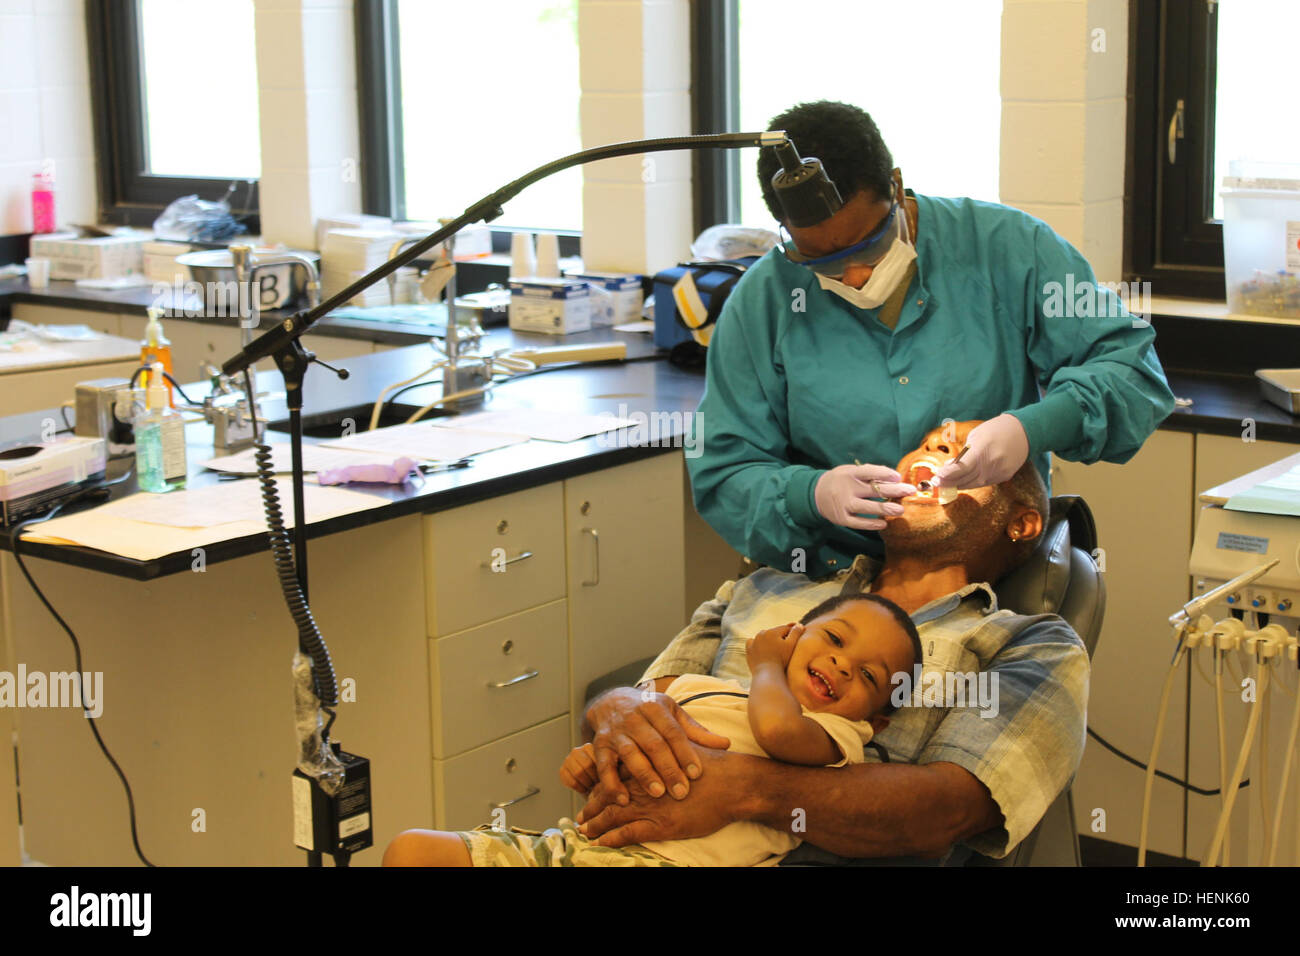 Sgt. 1st Class Nicole Lawrence, a dental hygienist with the 810th Medical Company (Detachment), 49th Multifunctional Medical Battalion out of Charleston, S.C., and the NCOIC of the Harrisburg dental clinic for Innovative Readiness Training exercise Southern Care 2014, examines the teeth of Don Wilkins of Harrisburg, while his son De'Mere, 2, laughs on his lap. The purpose of the civil-military program IRT SC14 is to improve military readiness while providing quality medical services at no cost to residents of Southern Illinois. Southern Care 2014 140620-A-VL725-004 Stock Photo